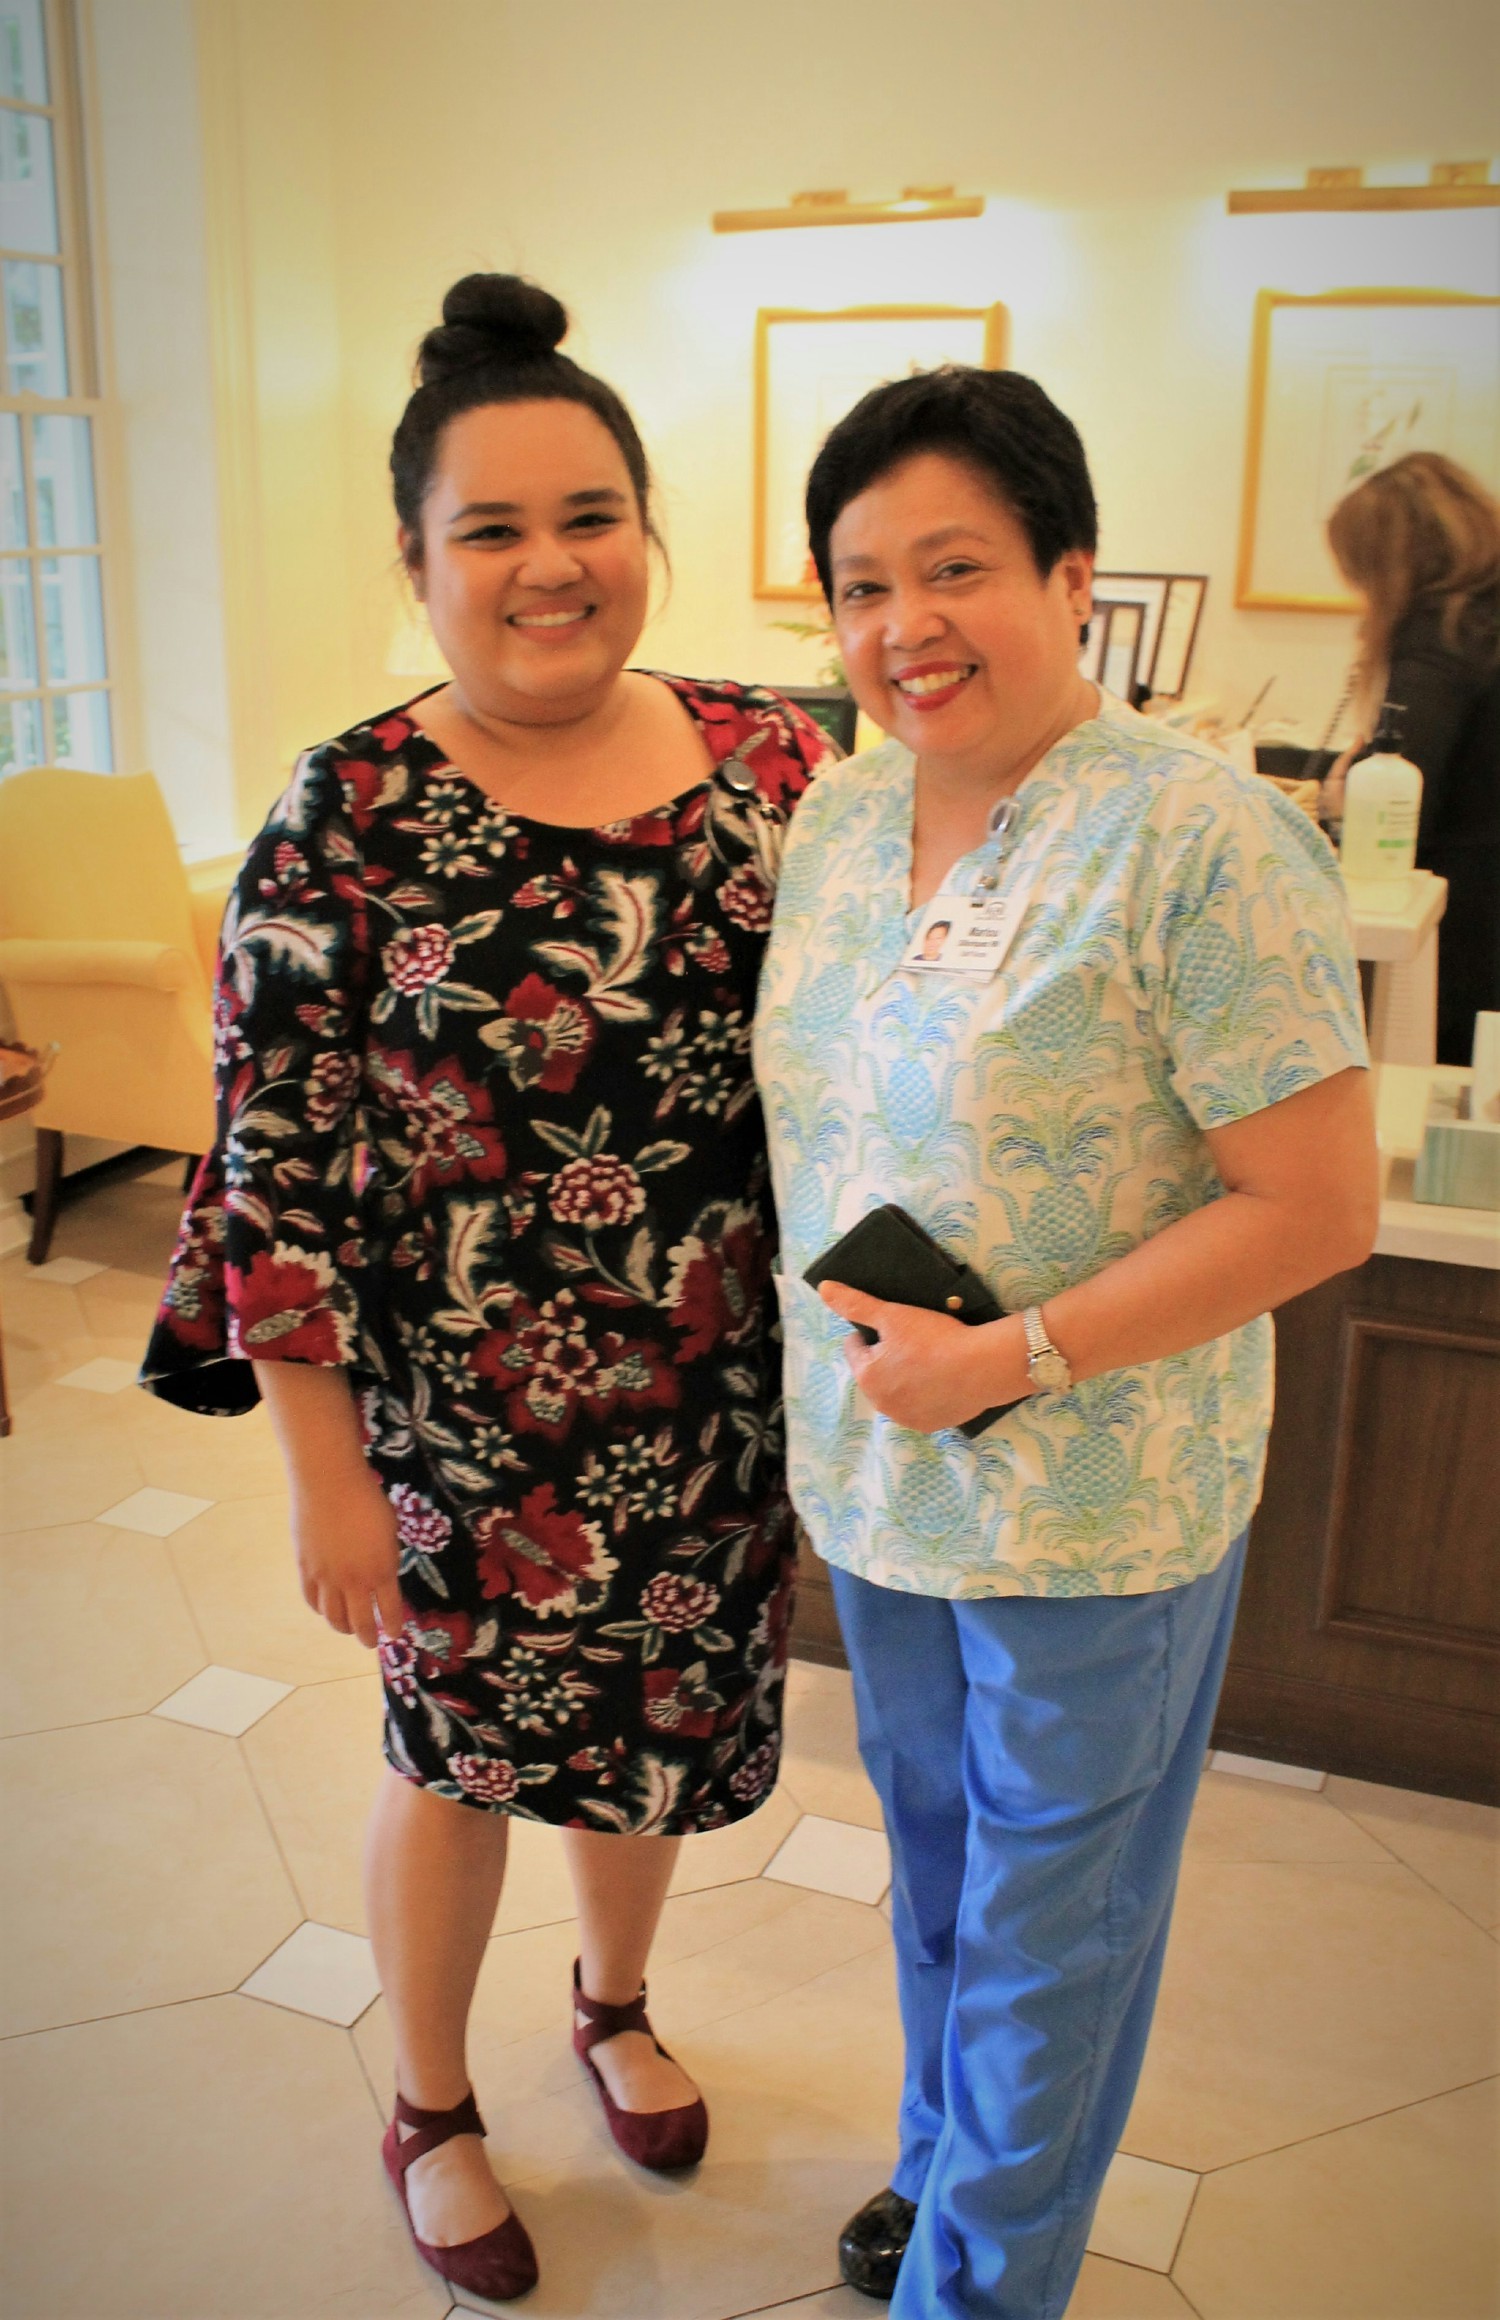 King-Bruwaert House staff is multi-generational. Daughters and Mothers work closely to ensure resident needs are met.
